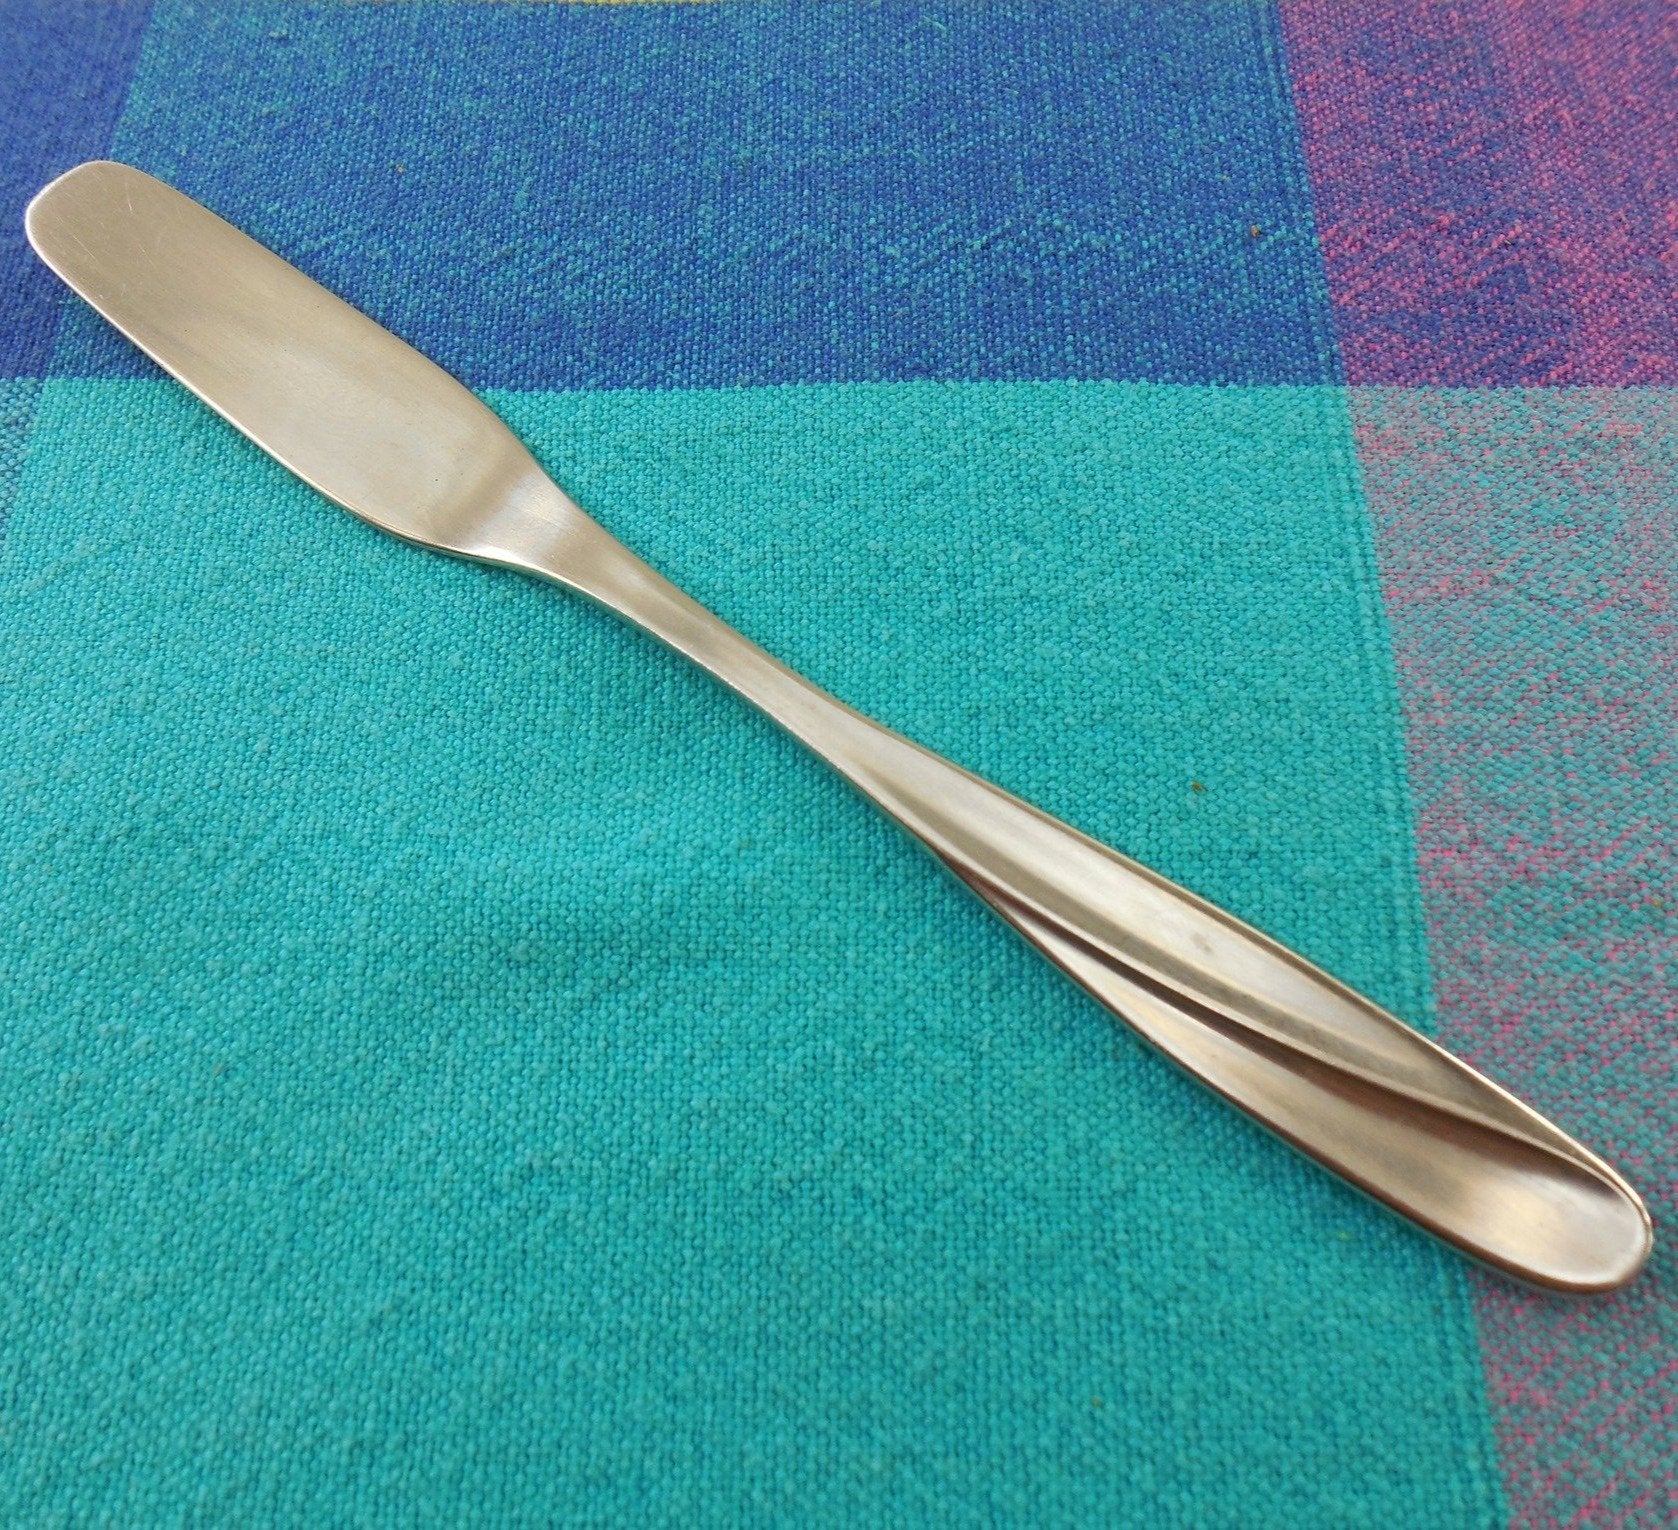 WMF Cromargan Germany Serena (old) Stainless Butter Knife